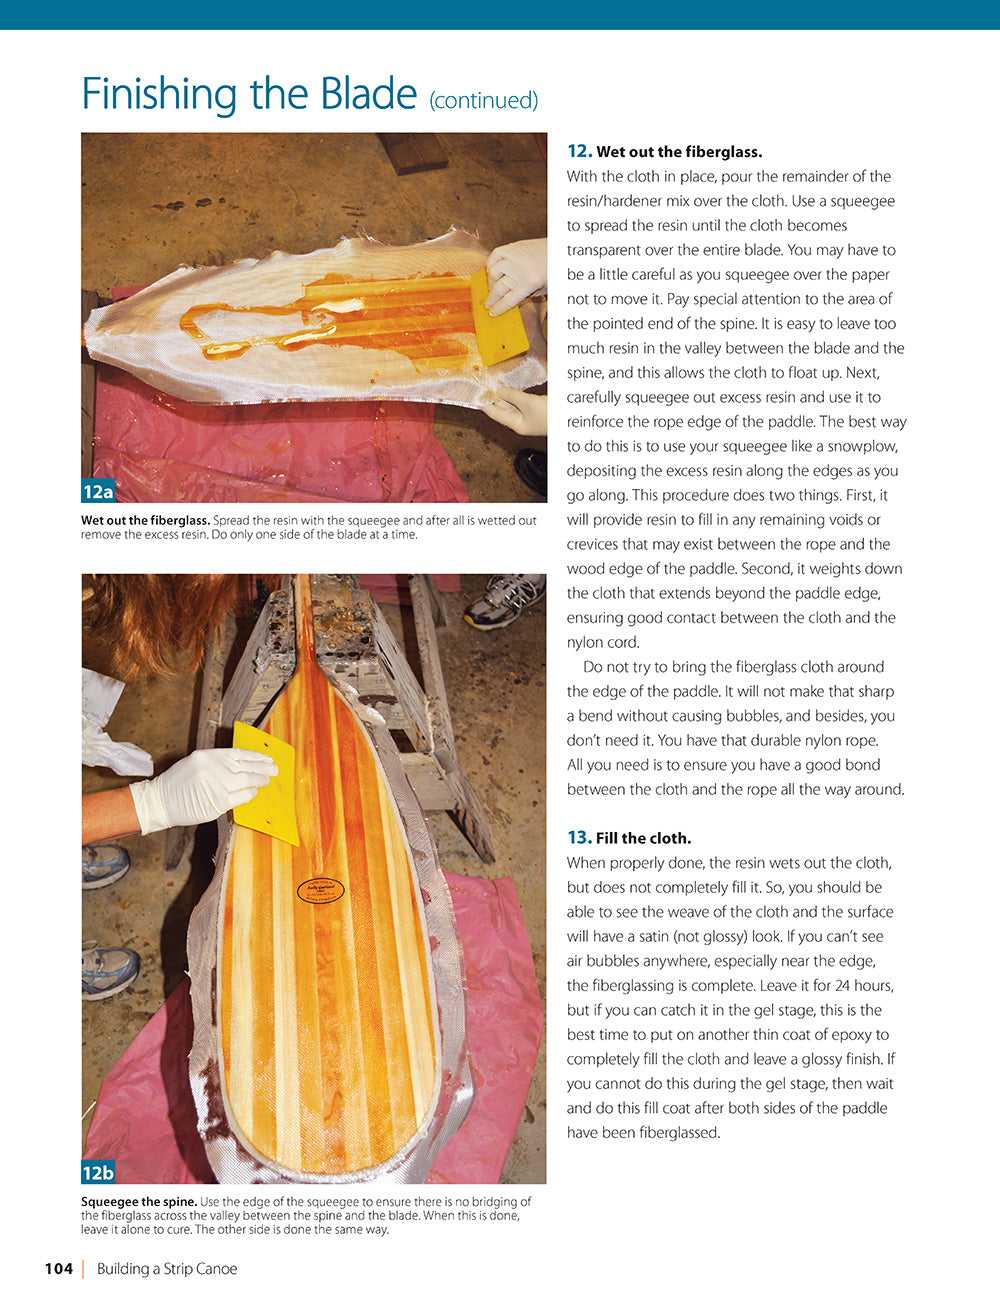 Building a Strip Canoe, Second Edition, Revised & Expanded